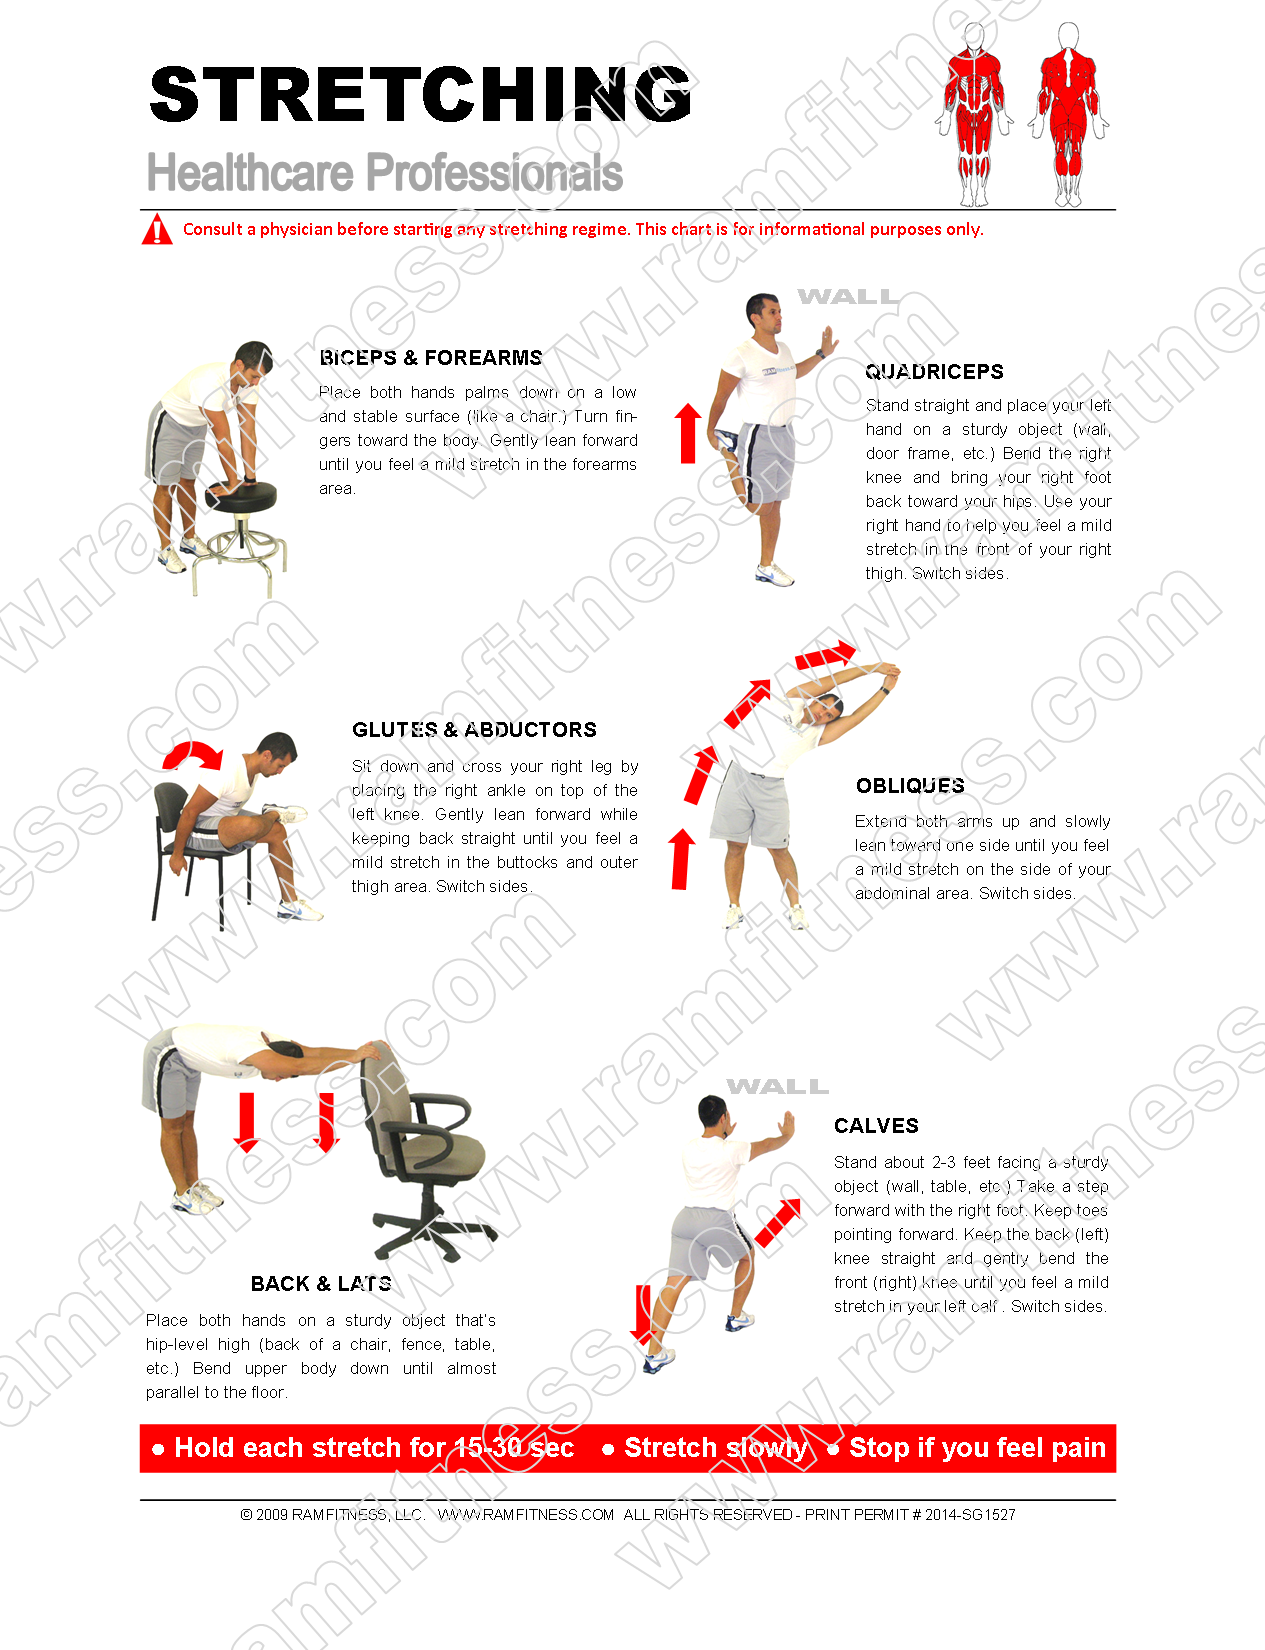 12 Healthcare Professional Stretches - PDF file plus tracking guide